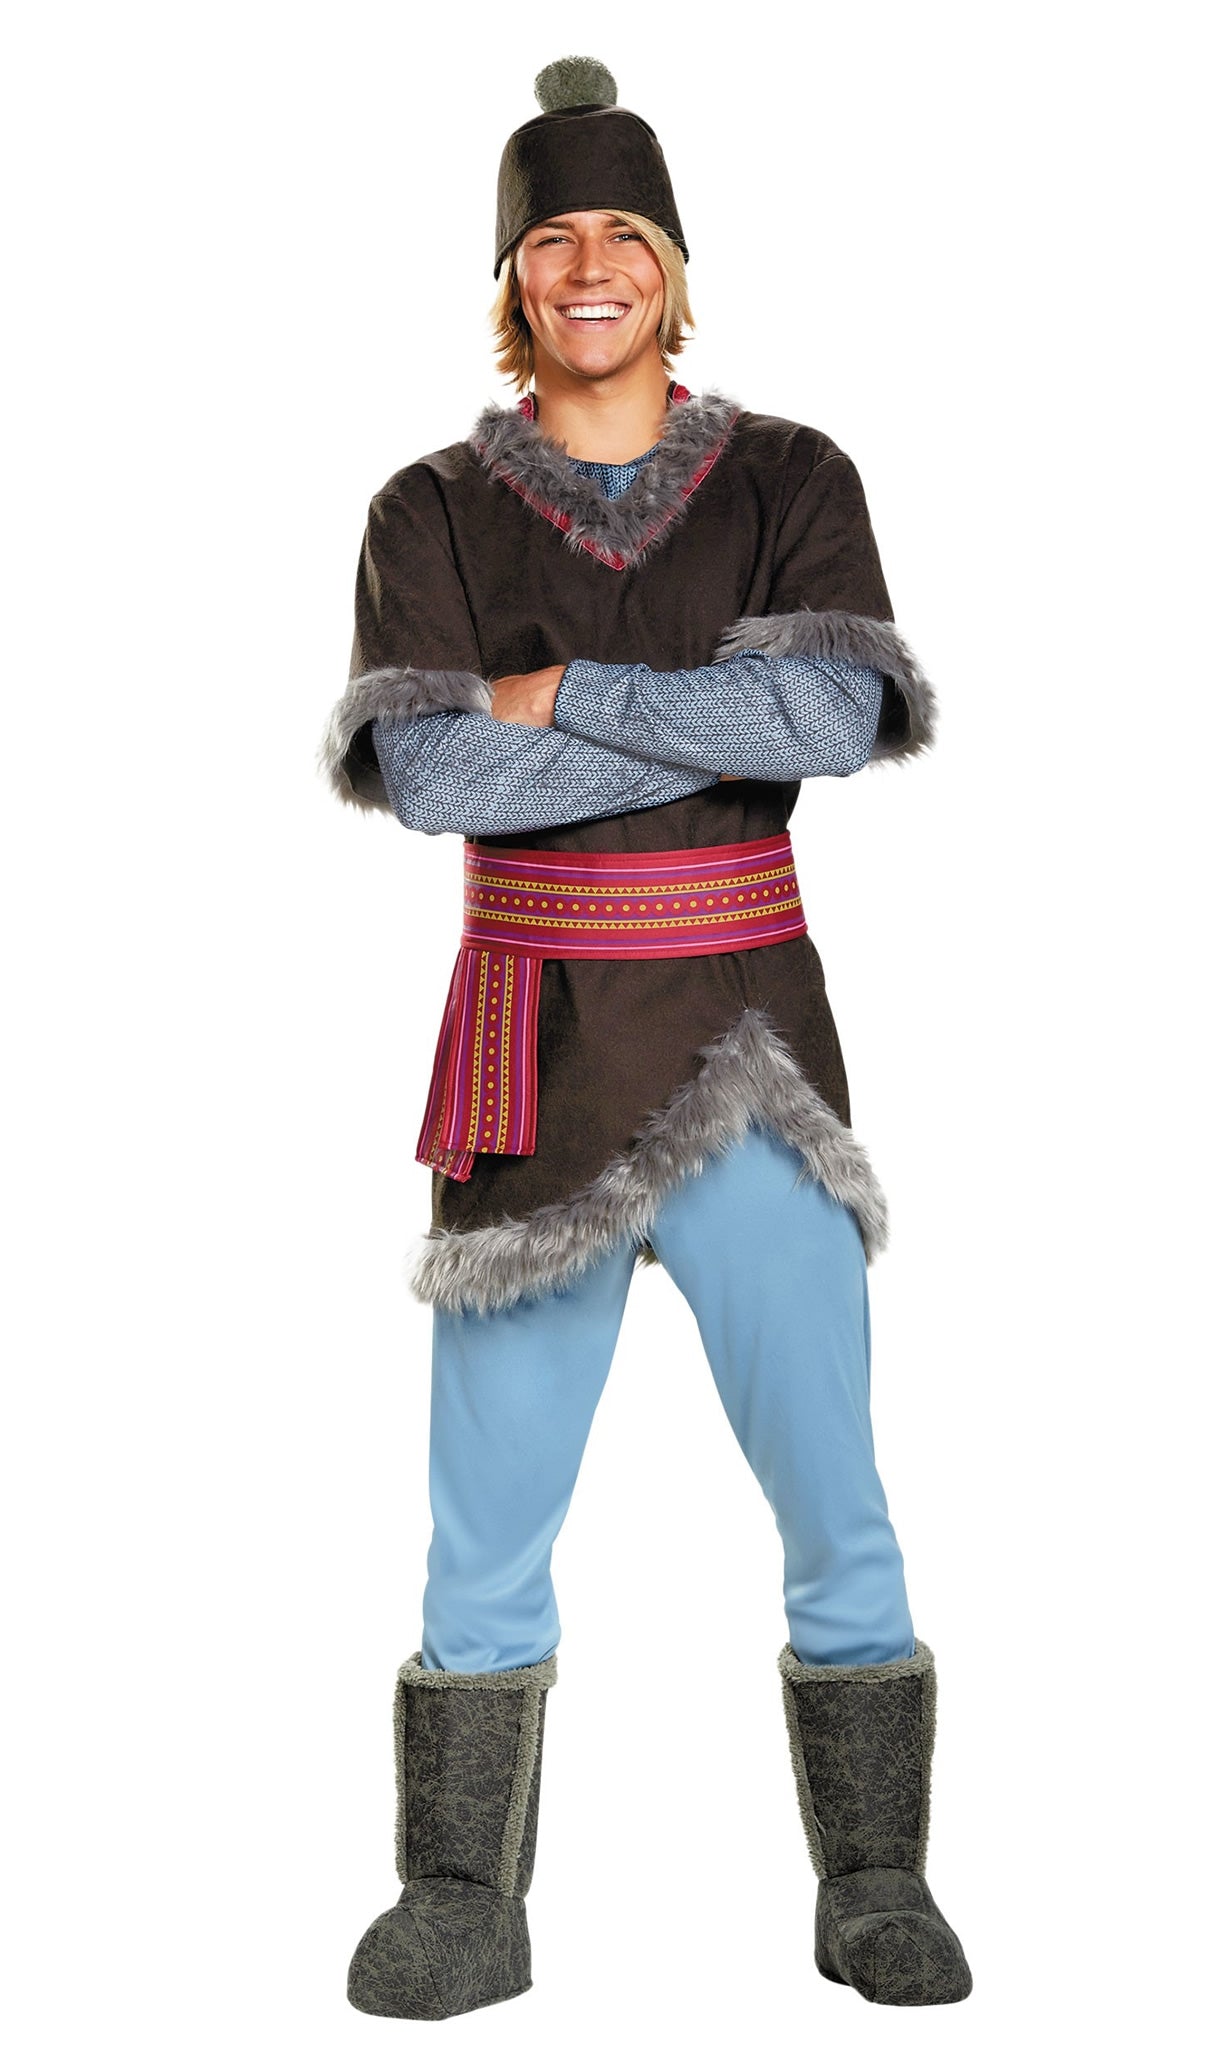 Kristoff costume from frozen, with hat and boot covers